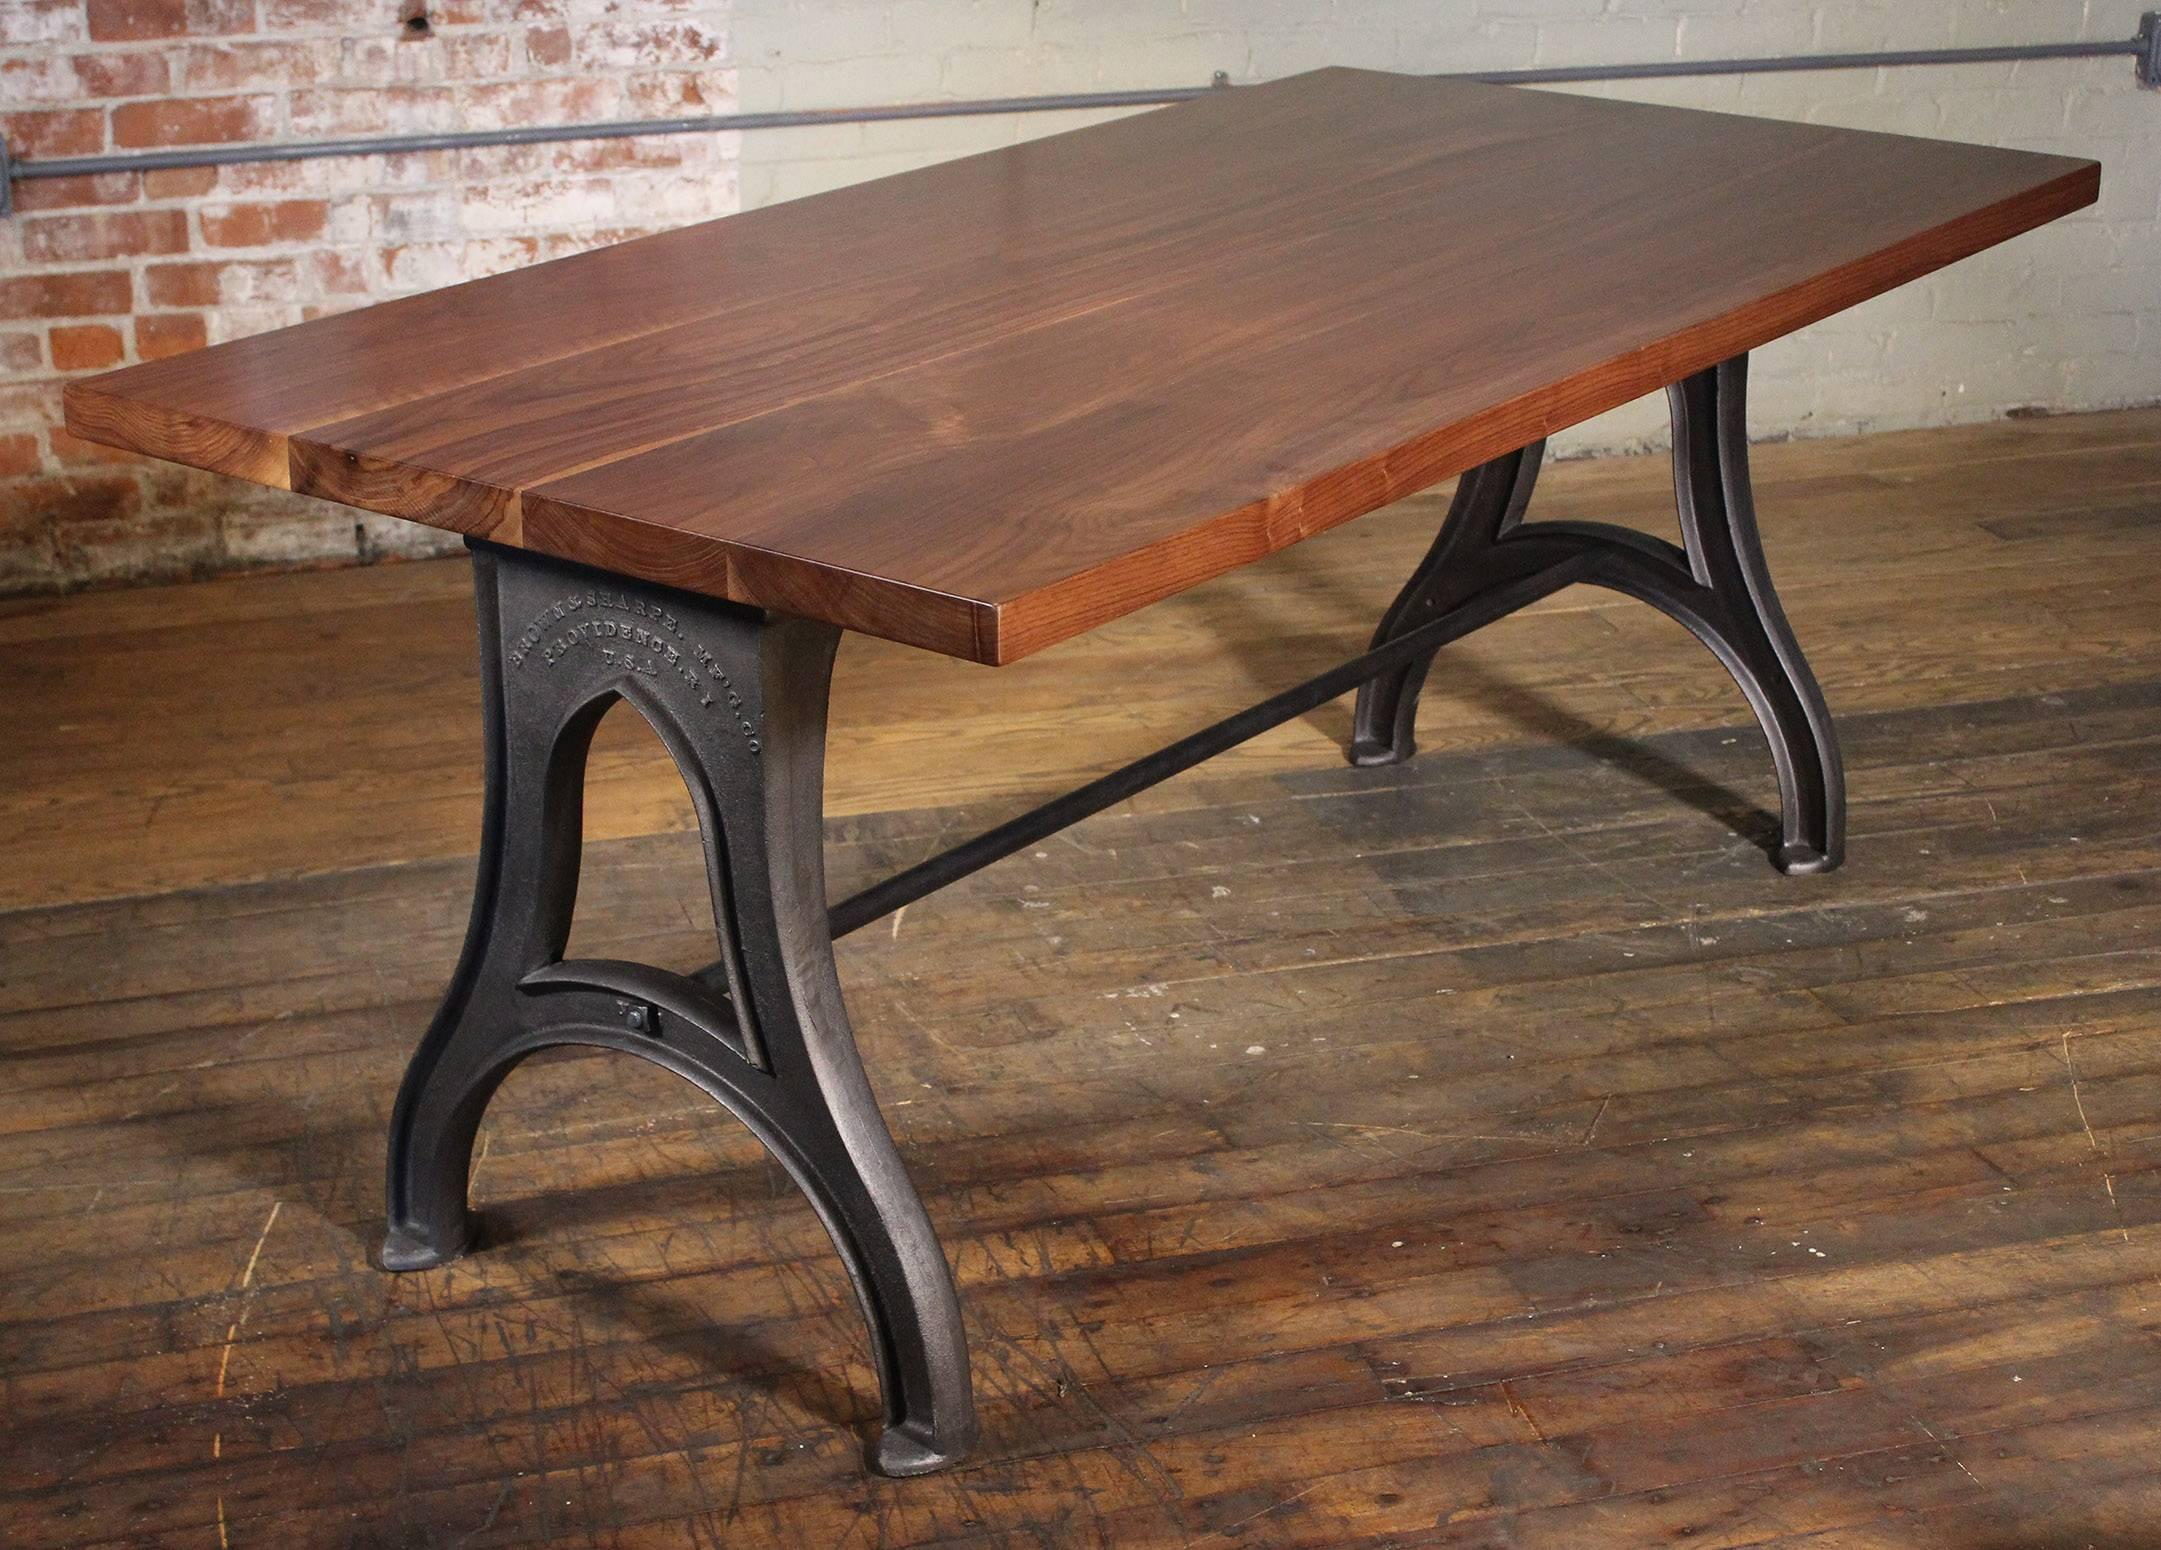 Bespoke Industrial modern work / office bespoke desk / table with 1 3/4" wooden walnut top, "Brown & Sharpe" Cast iron legs and steel stretcher. Overall dimensions measure 72" x 36" x 29 3/4", space between legs